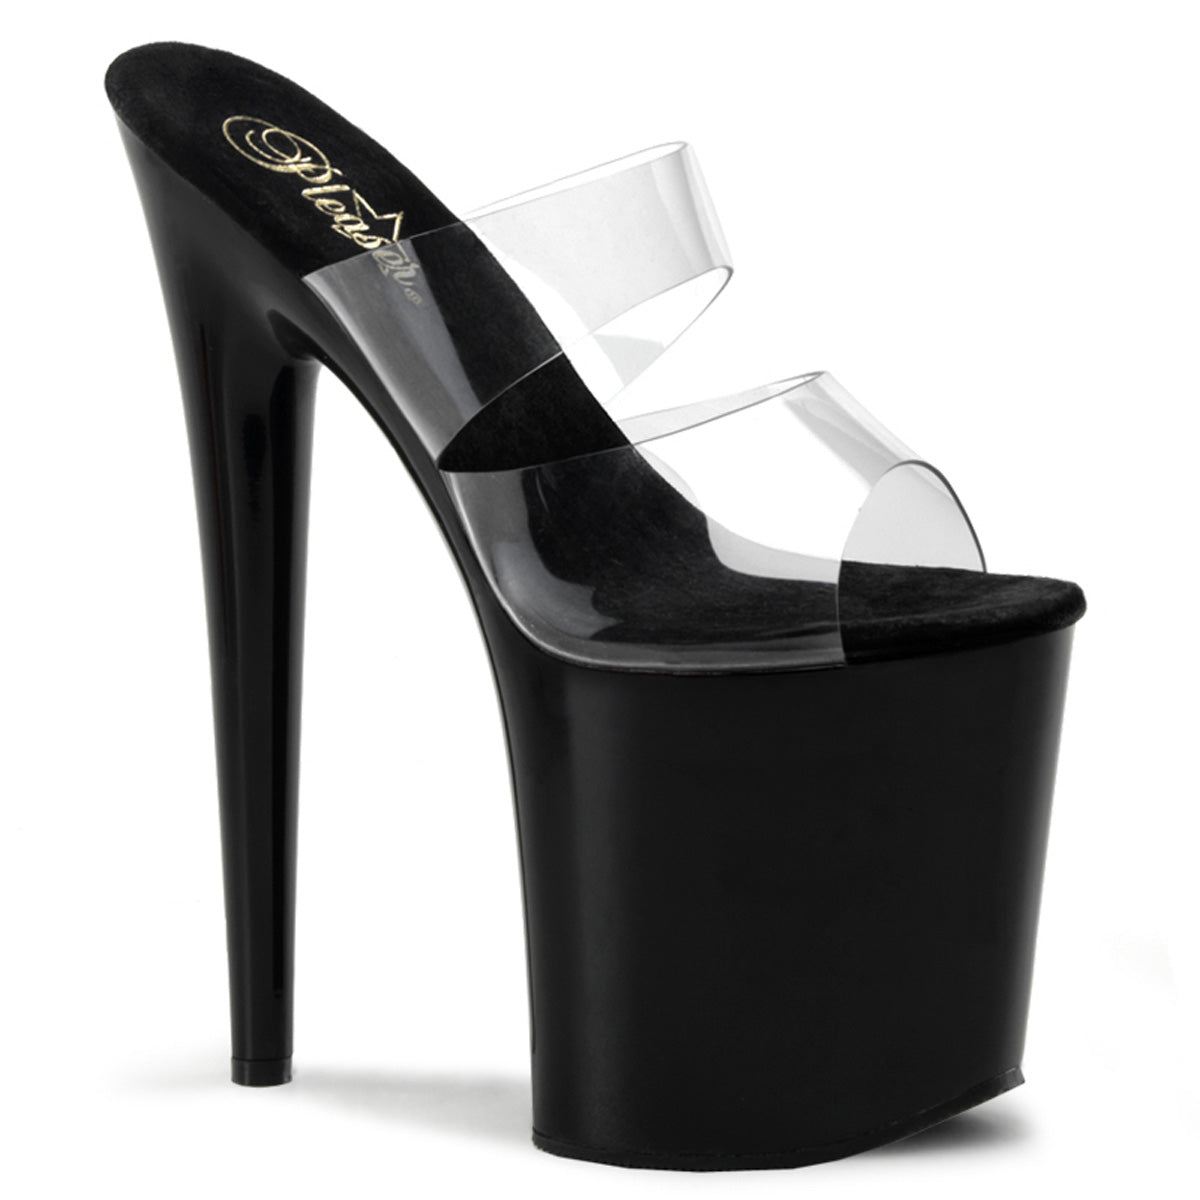 FLAMINGO-802 8" Heel Clear and Black Pole Dancing Platforms-Pleaser- Sexy Shoes